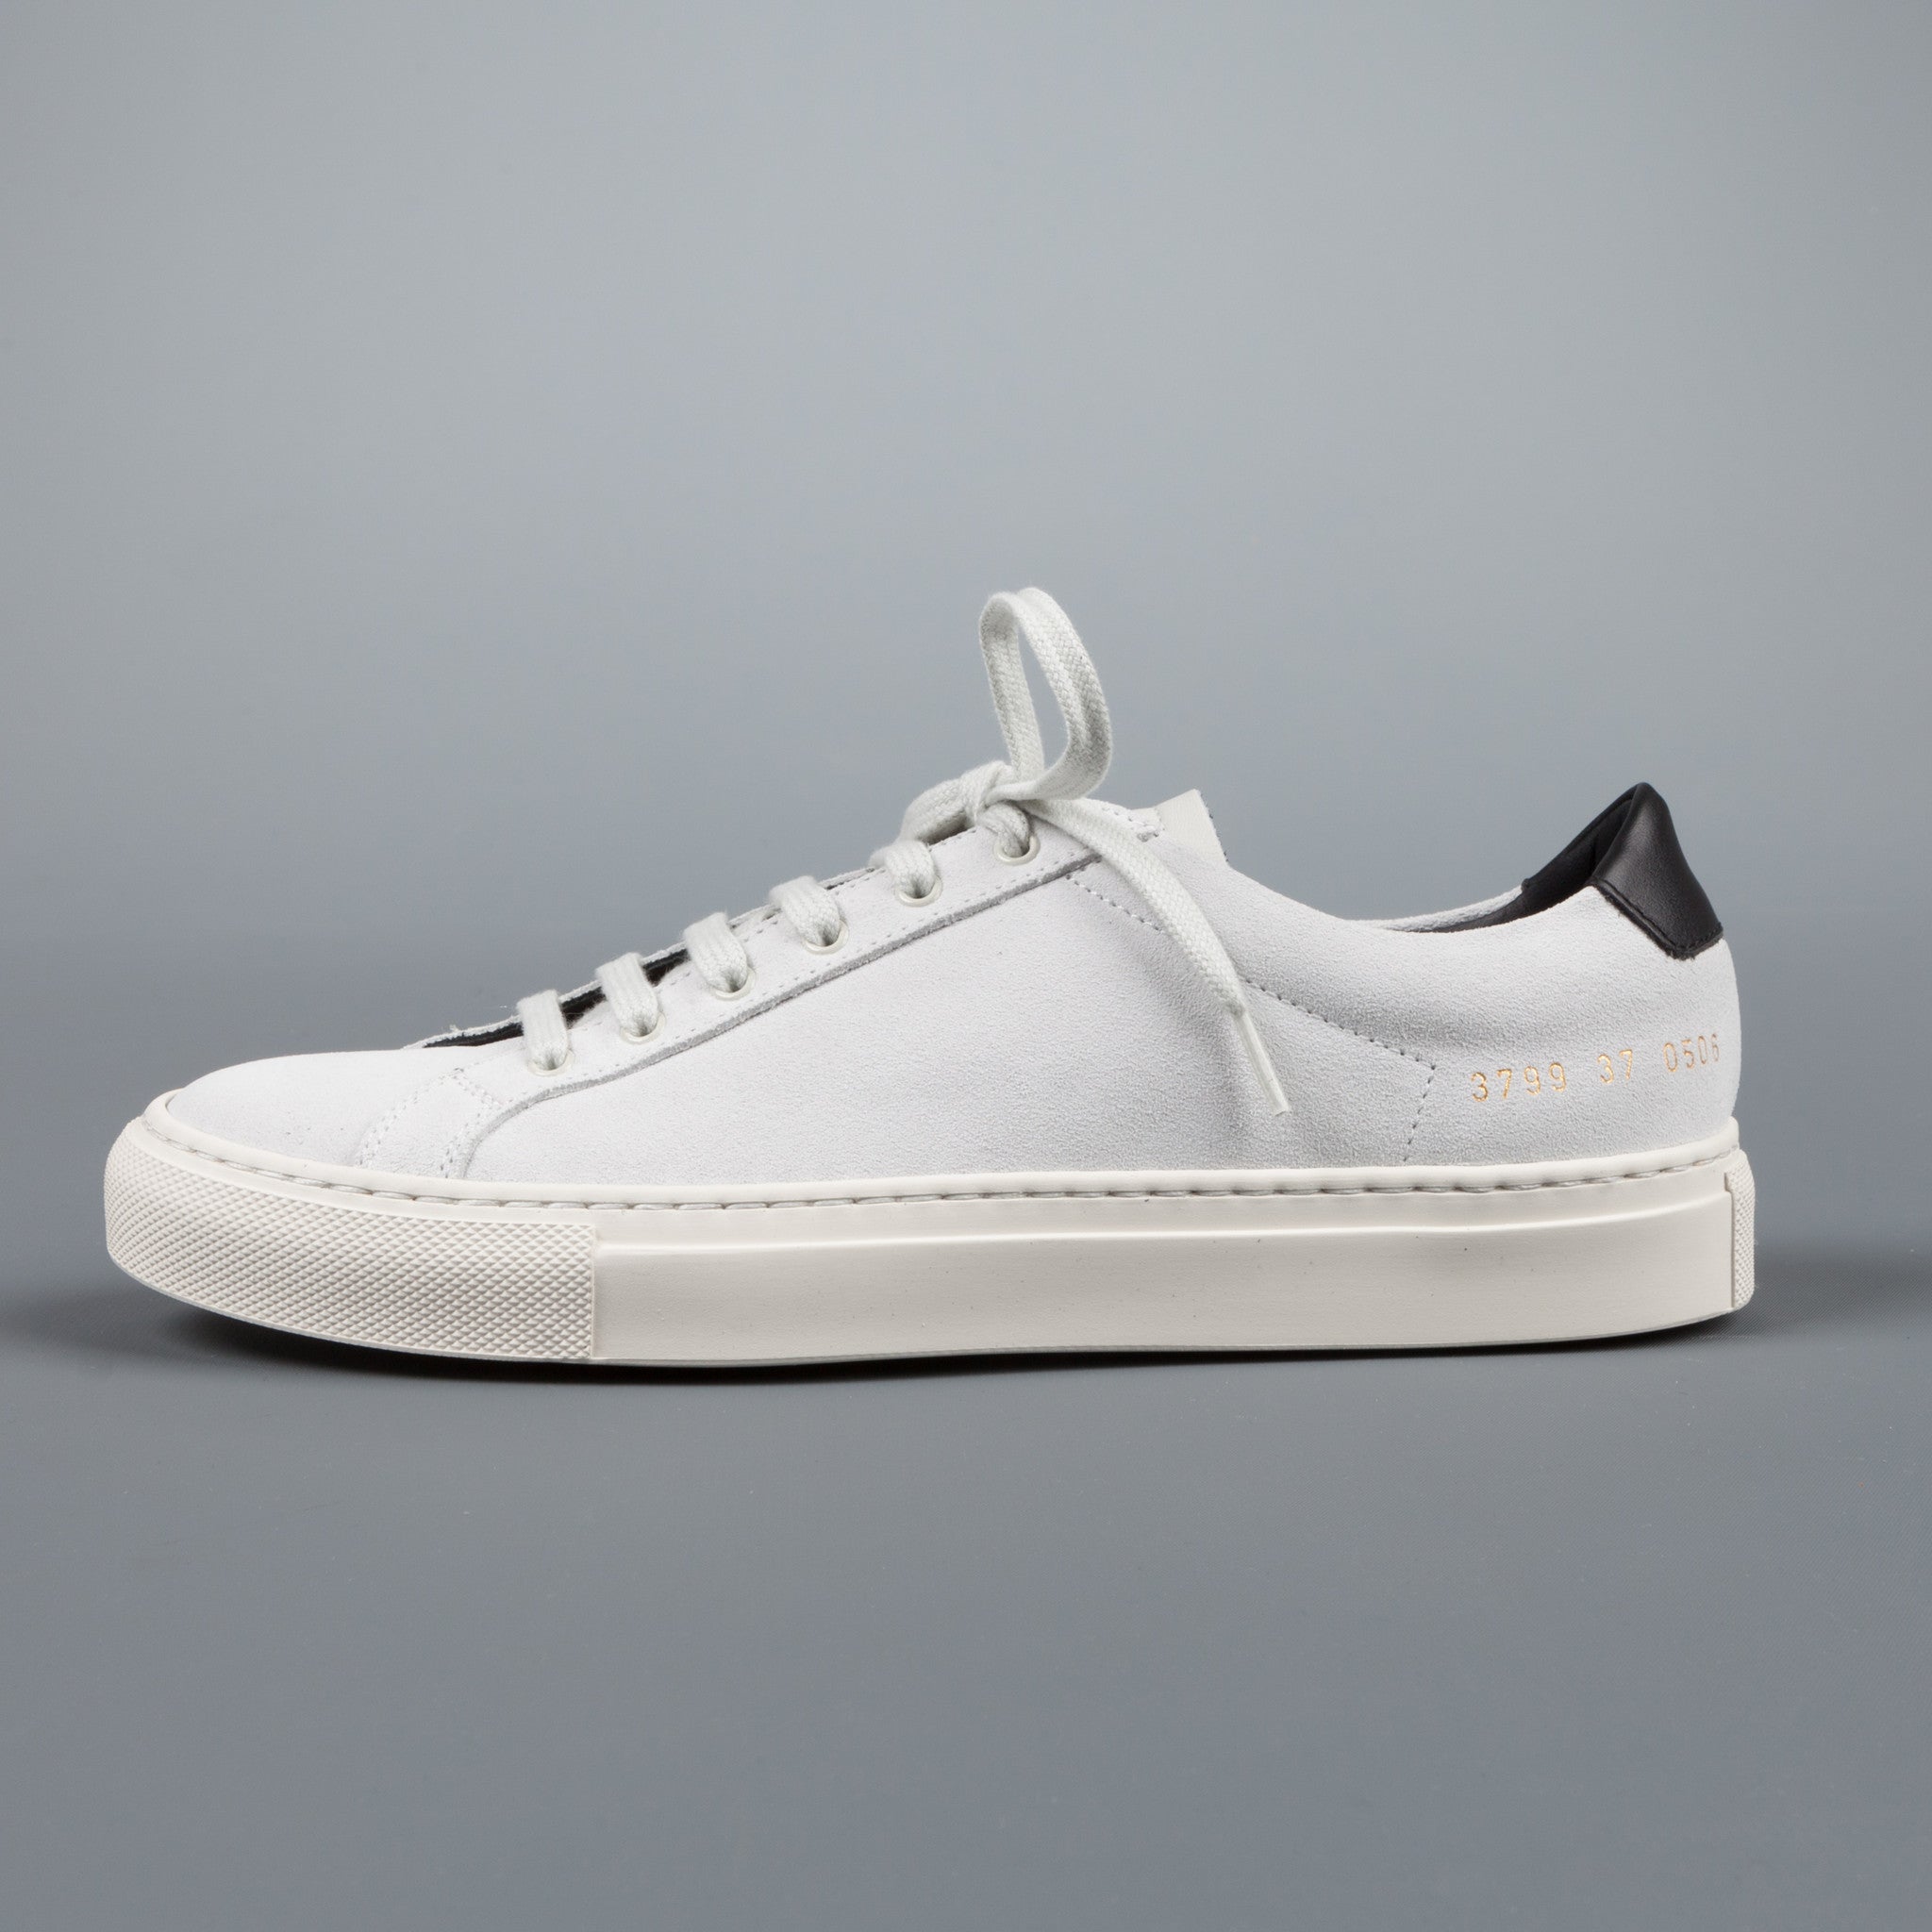 Lydig grundlæggende eskalere Common Projects Woman by Common Projects Achilles retro low suede whit –  Frans Boone Store